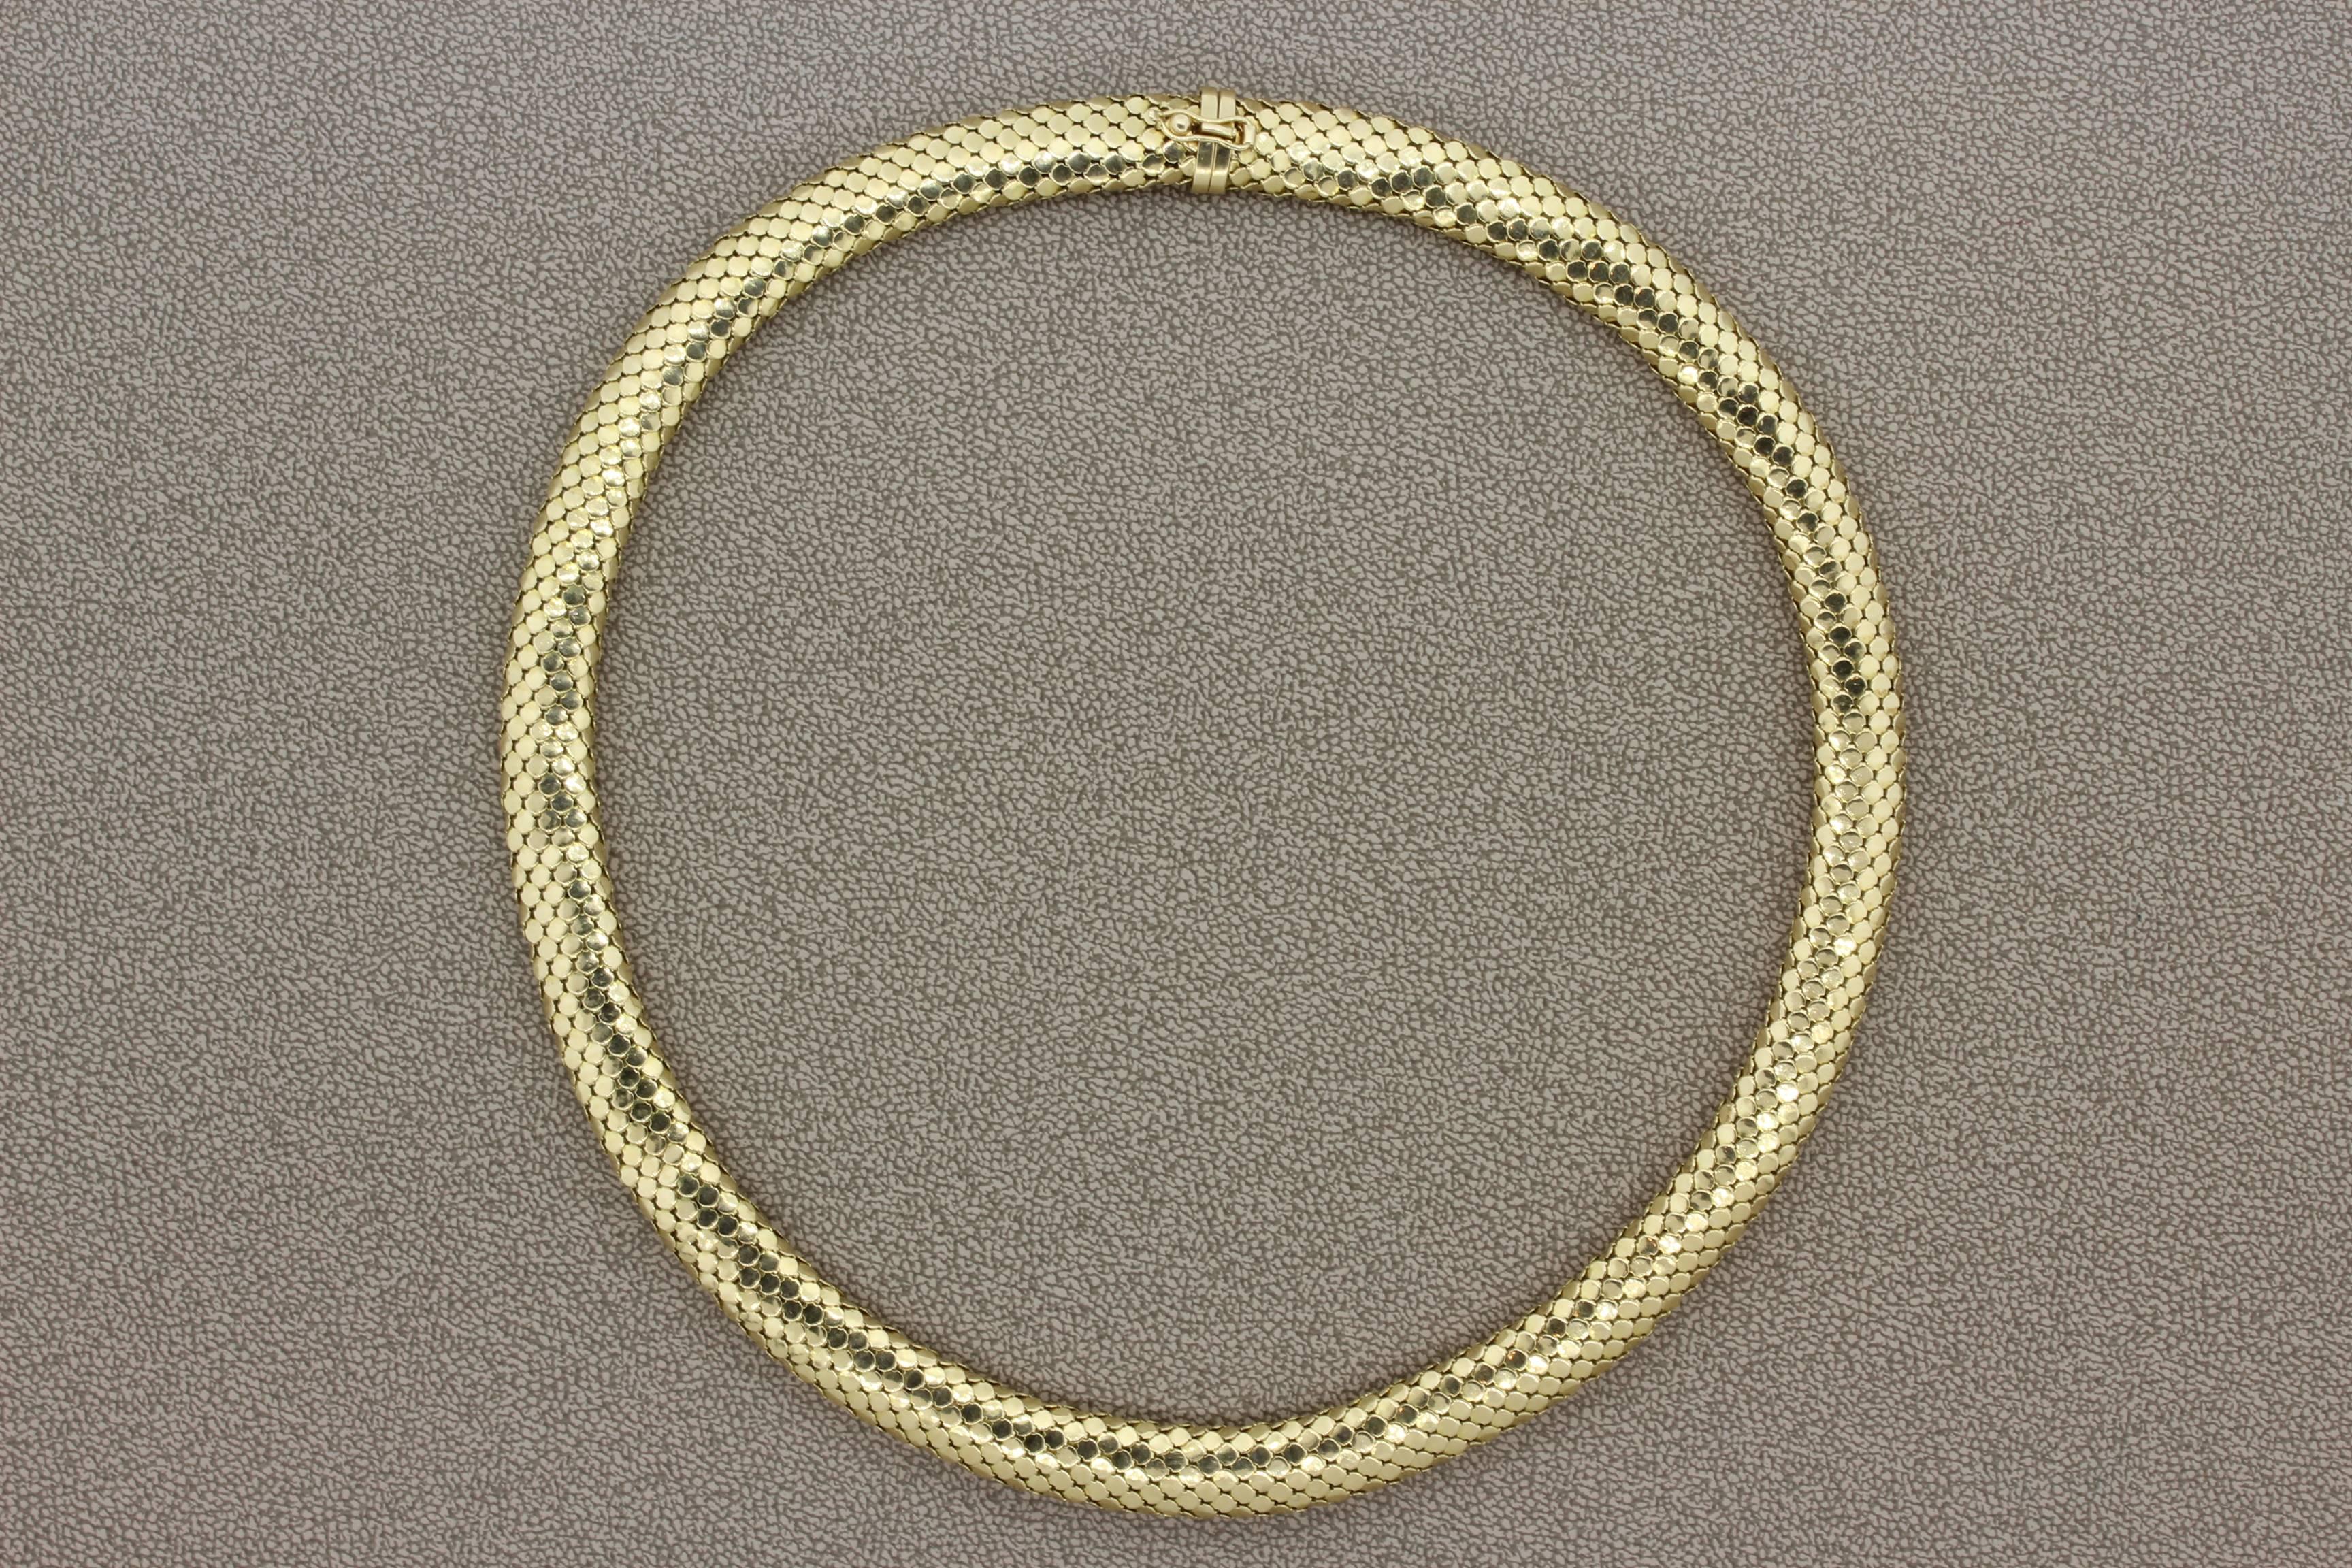 A lovely necklace hand made with 18K yellow gold. It flexes and contorts easily allowing it to lay flat around any neck, including your own!

Length: 17 ½  inches 
